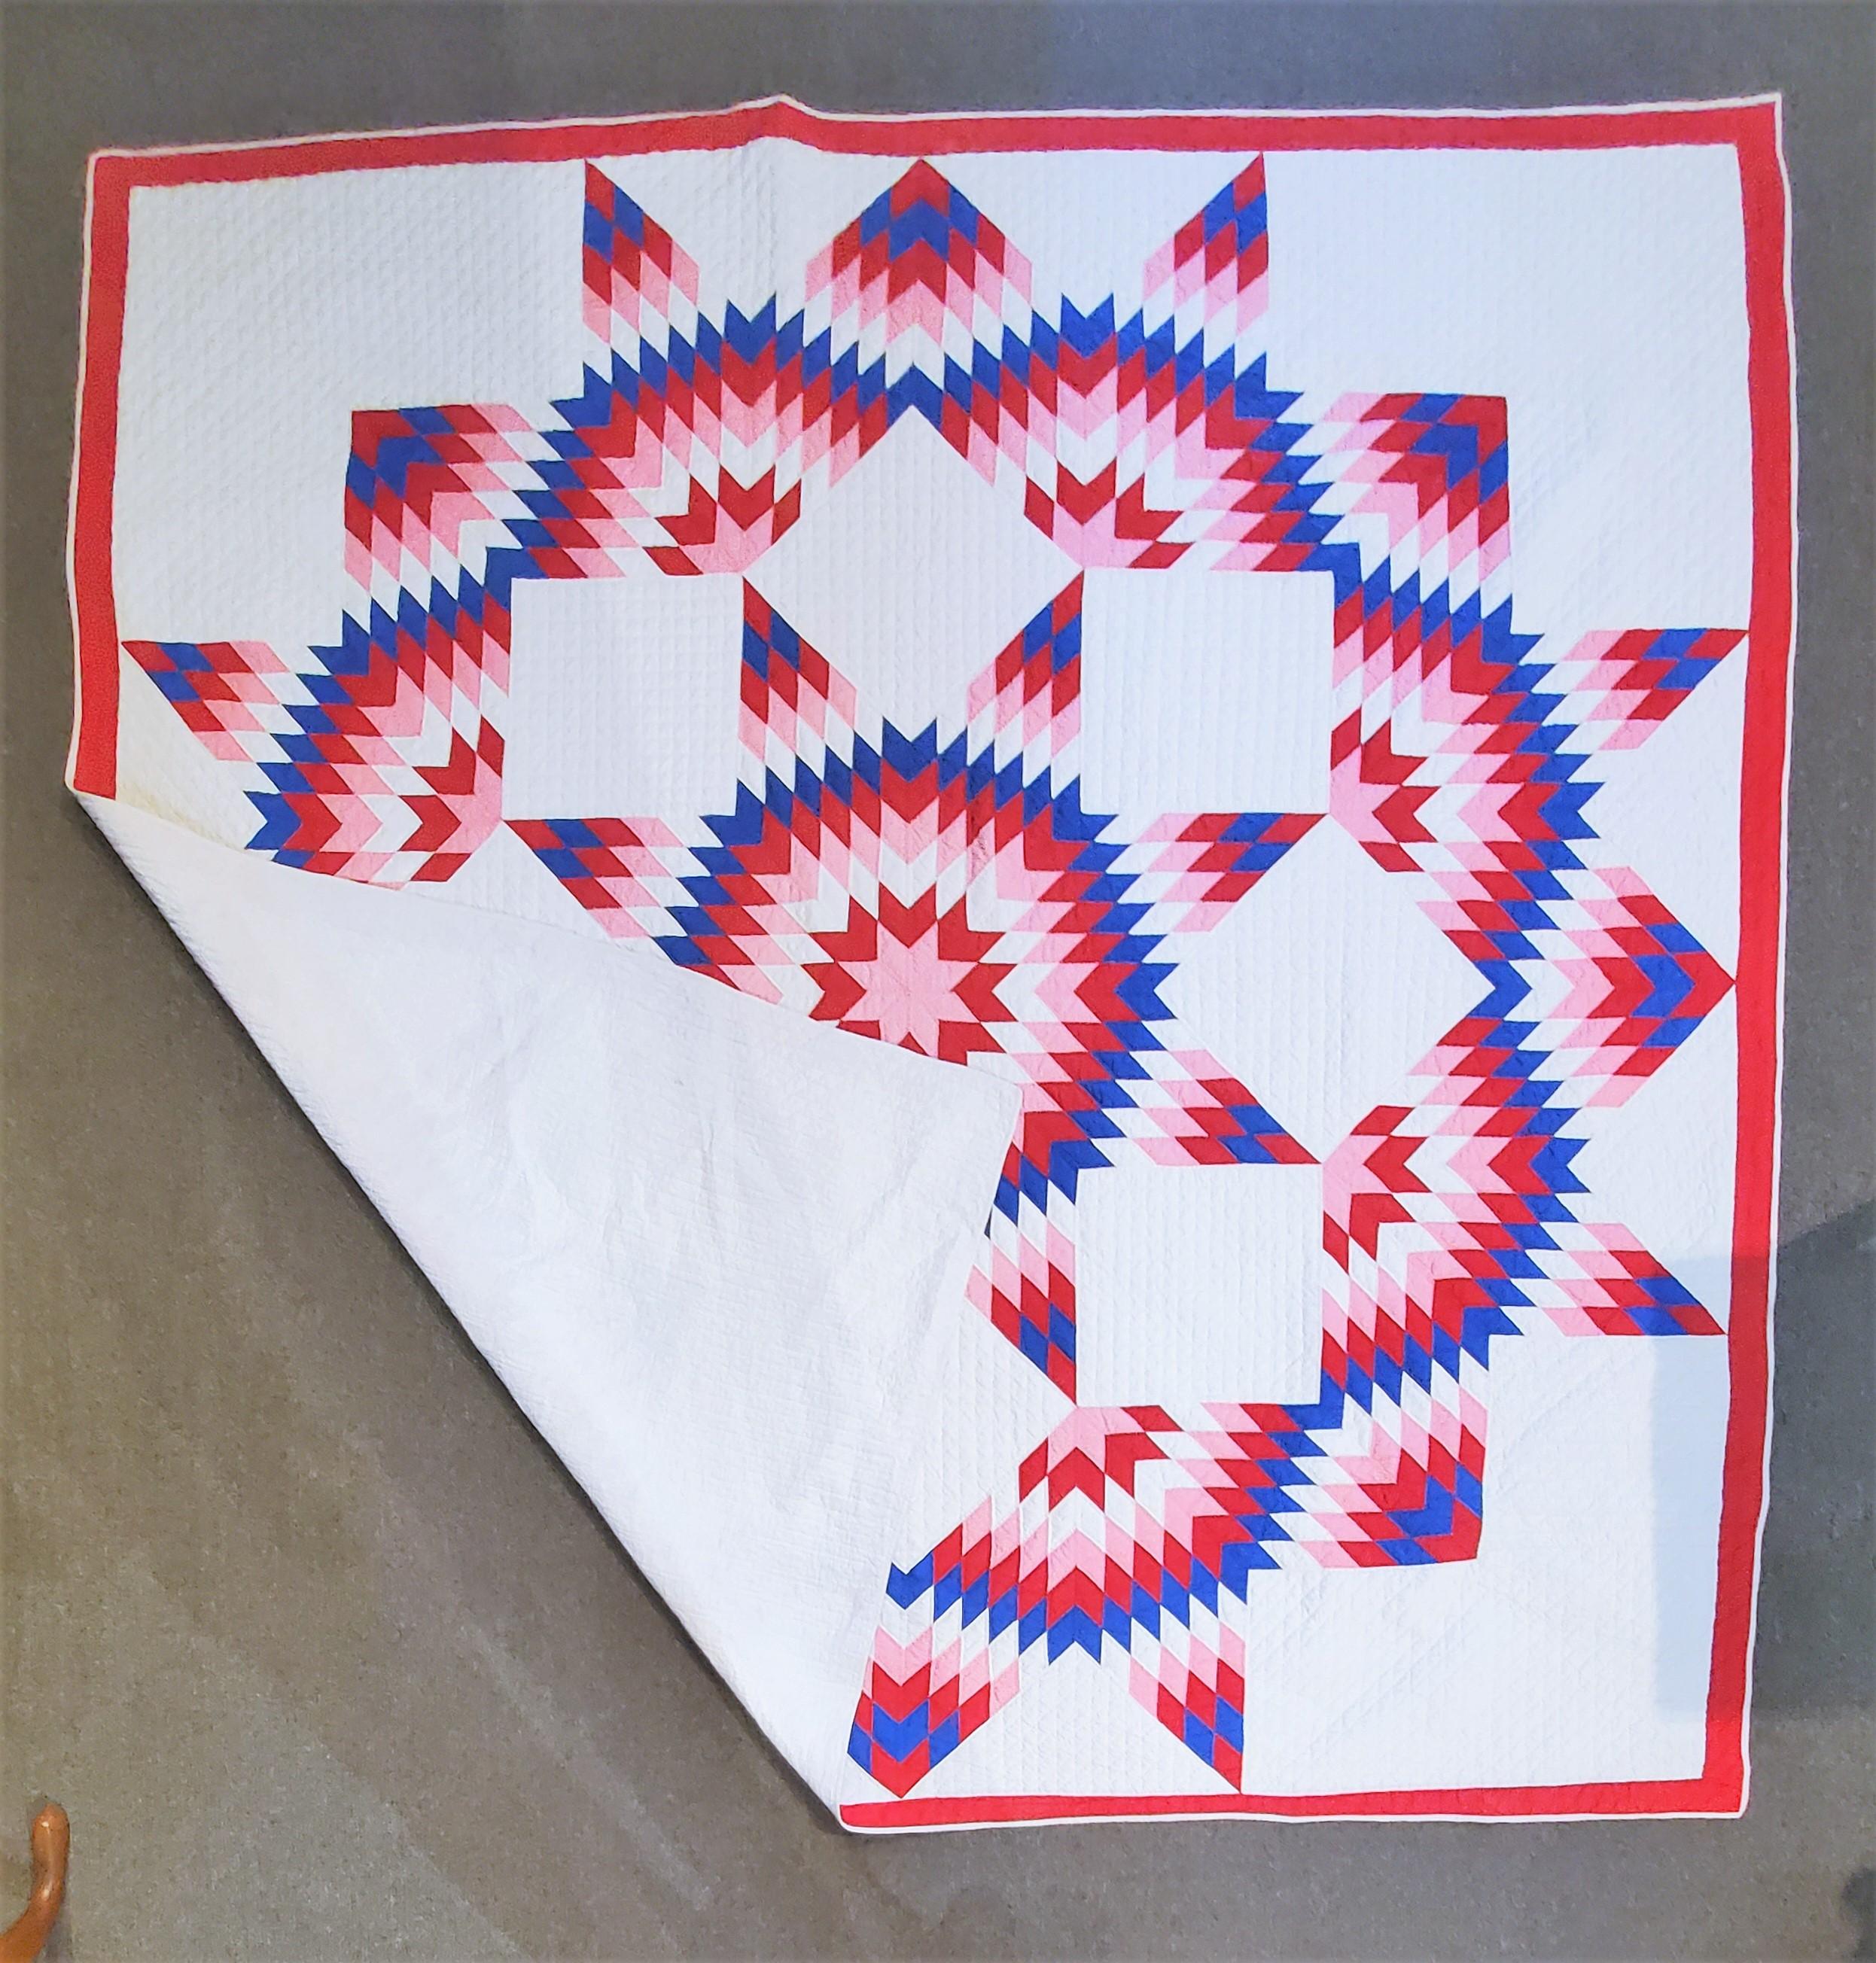 This finely quilted and pieced broken star quilt is in fine condition. It’s most unusual with the pink trailing color. Really works well with the red, white and blue colors.